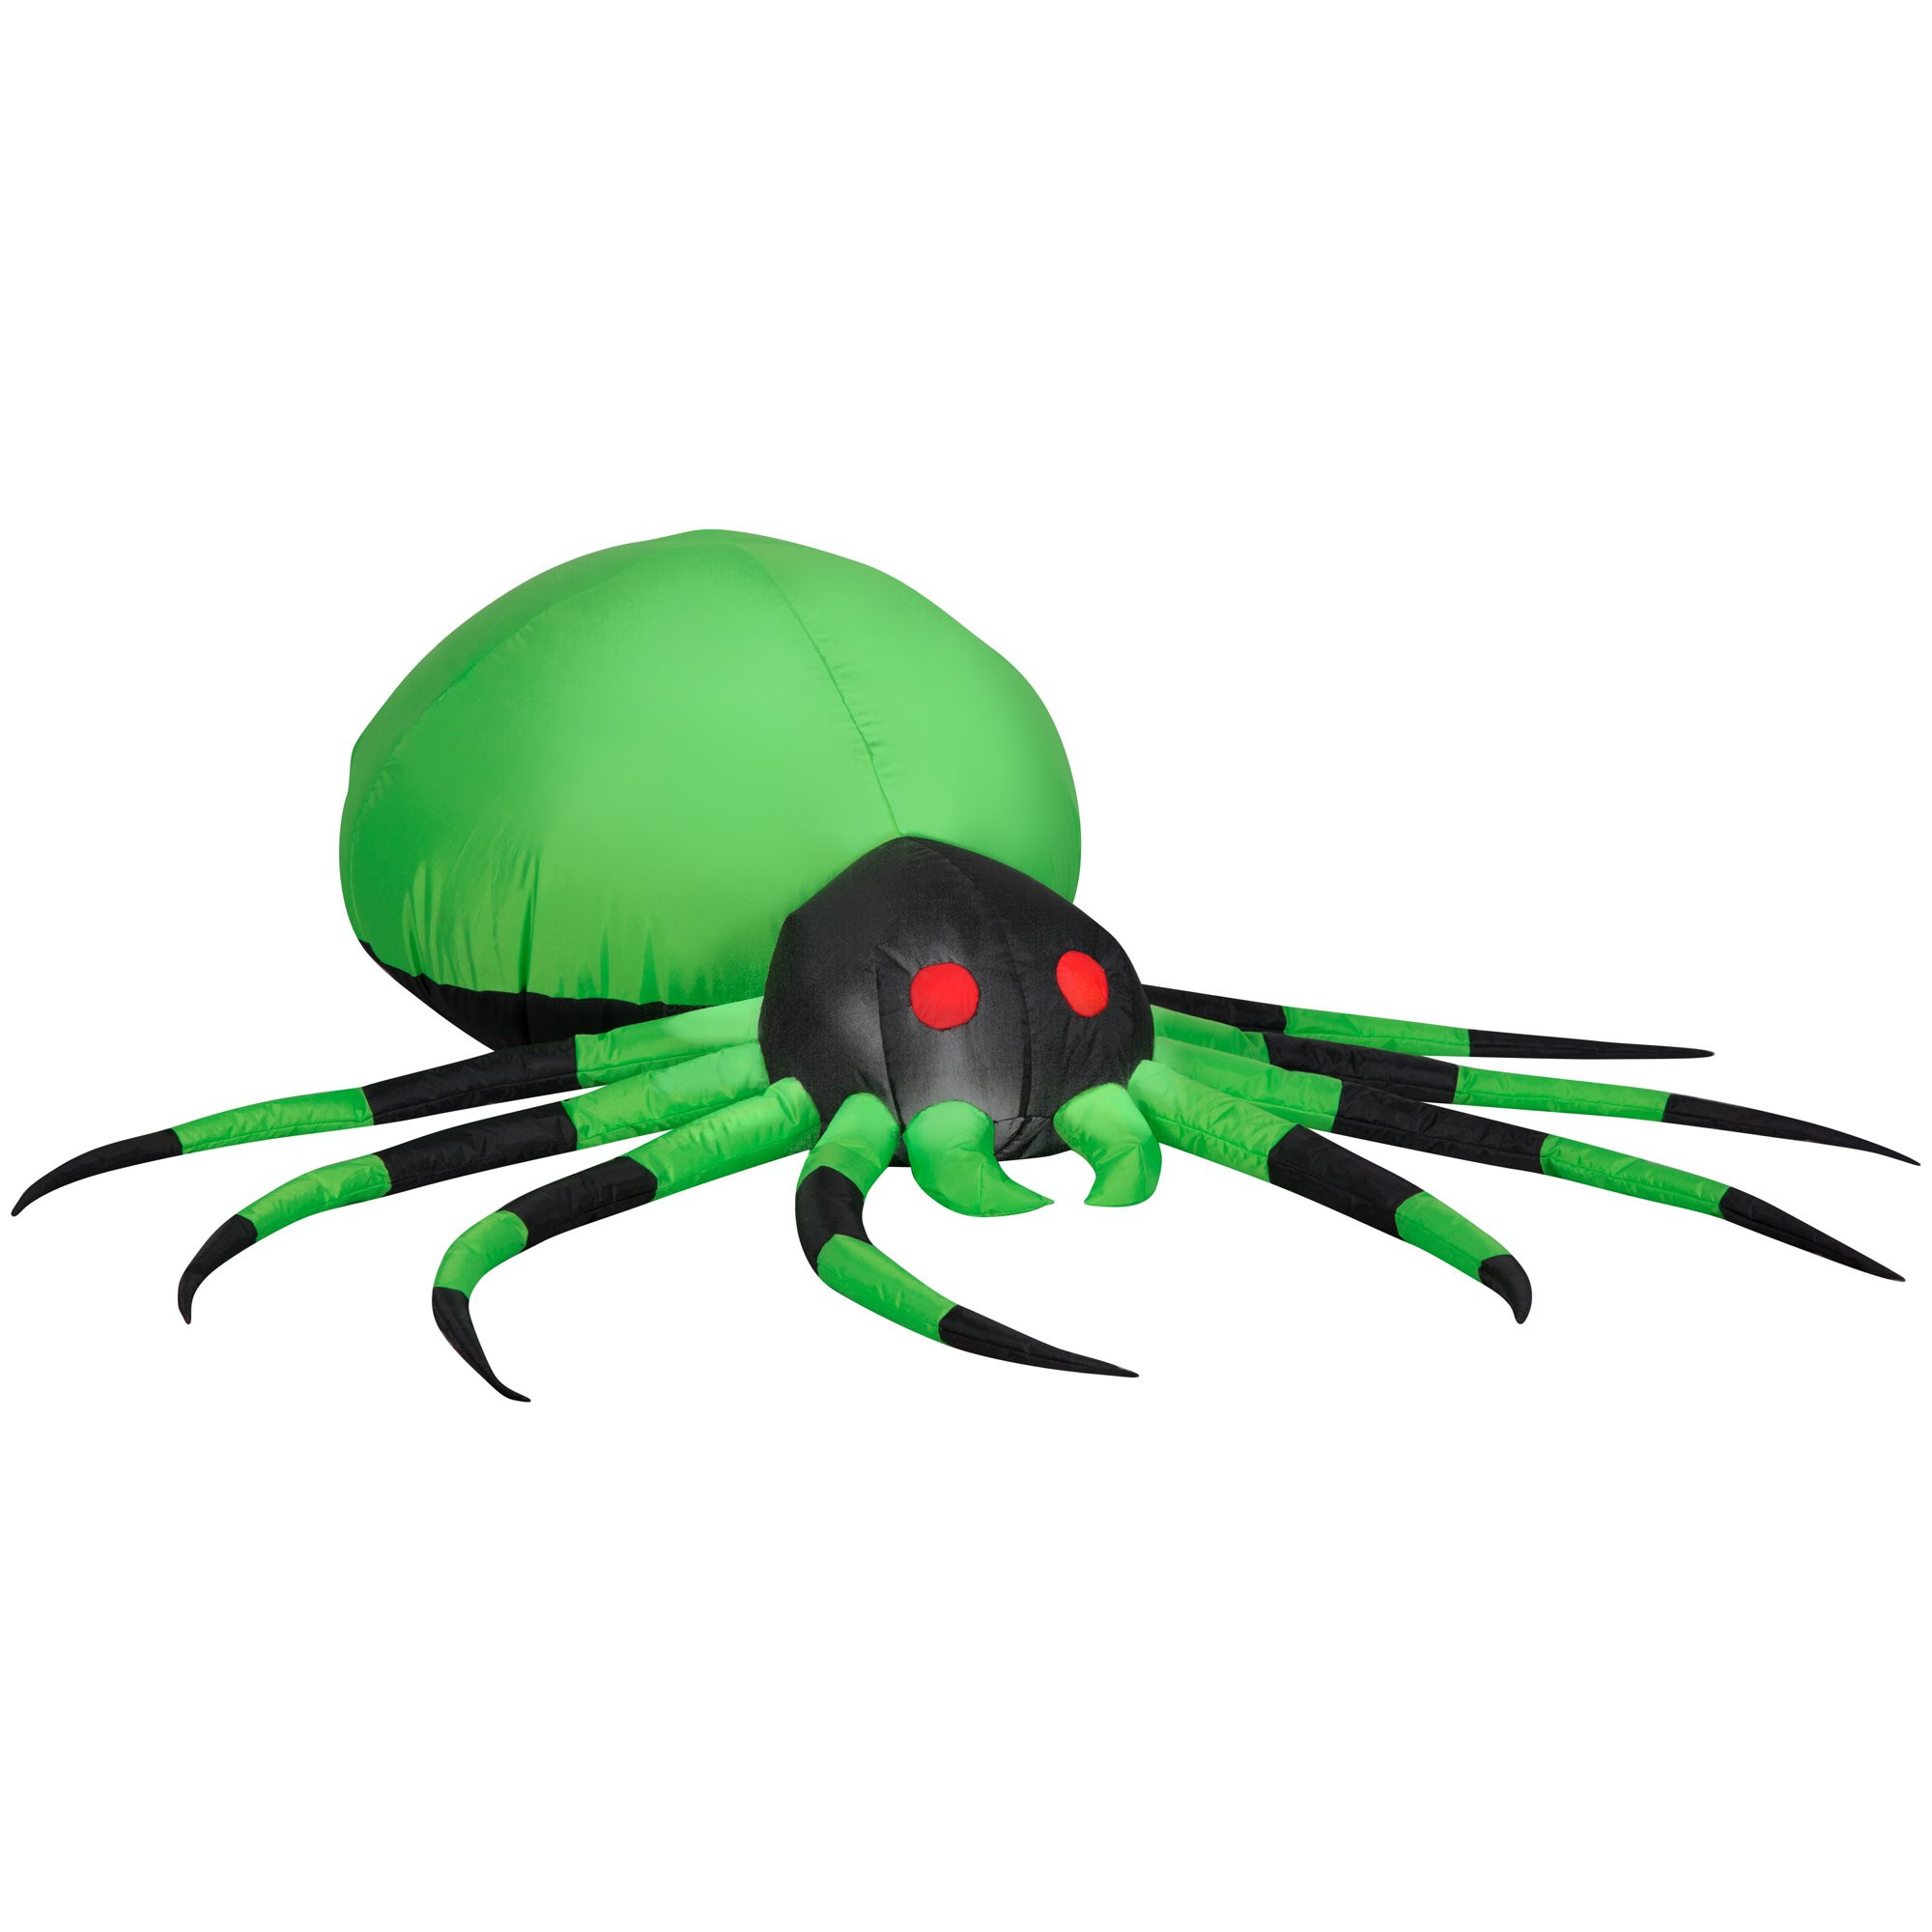 4 FT Halloween Airblown Inflatable Green Spider